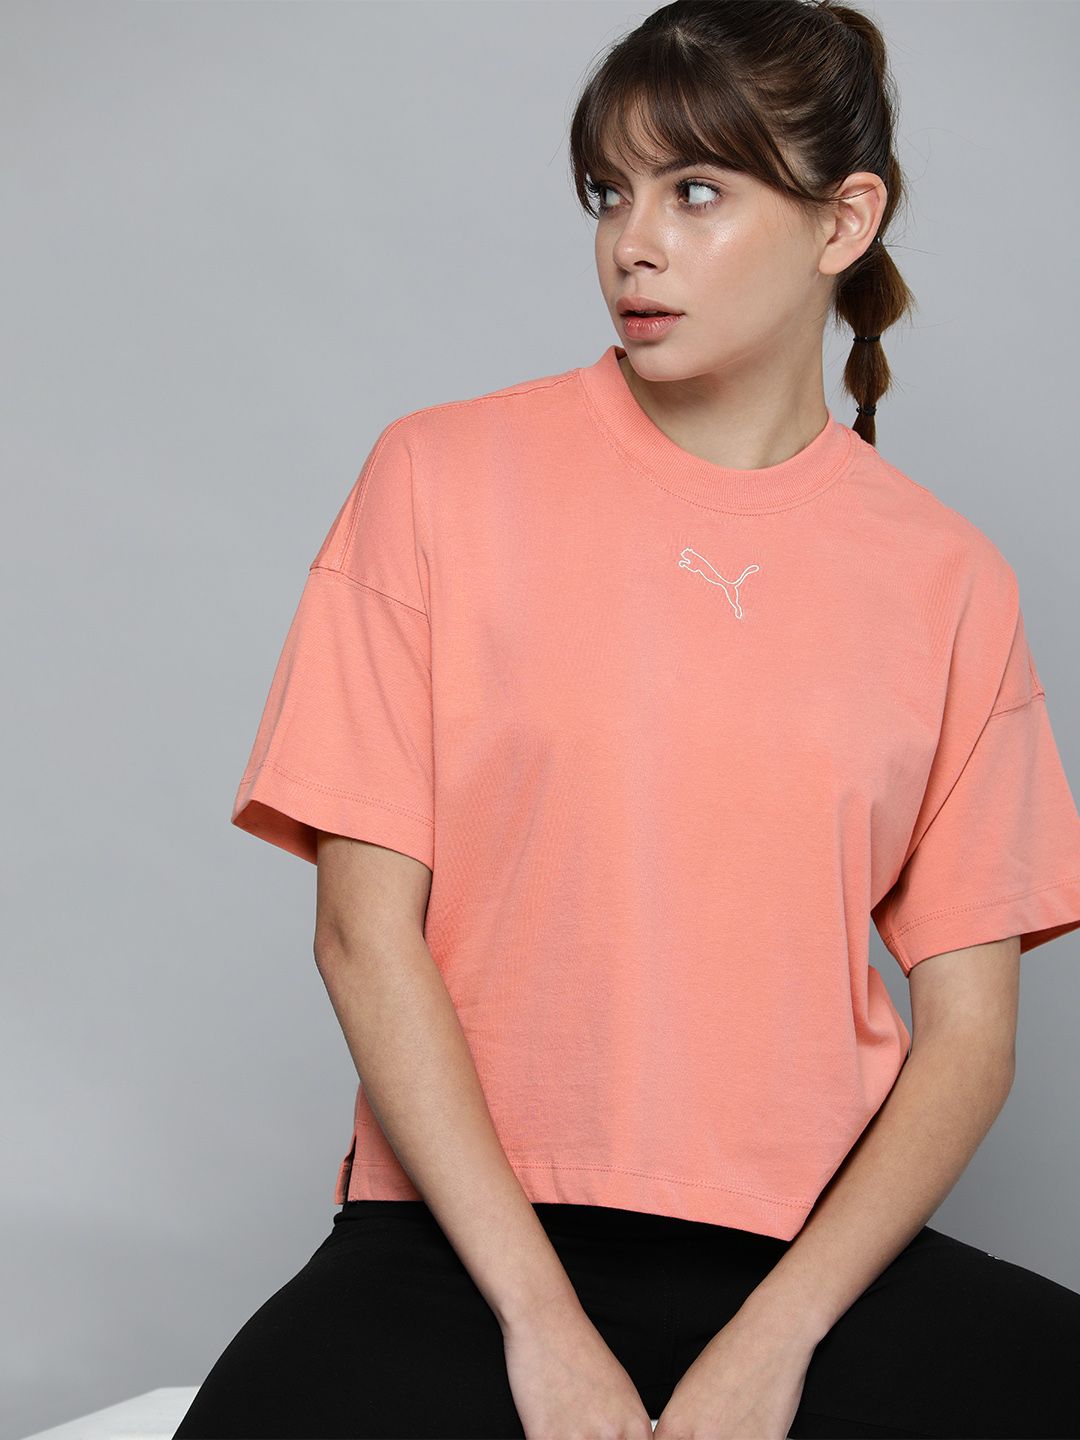 Puma Women Peach-Coloured Embroidered Pure Cotton Crop T-shirt Price in India